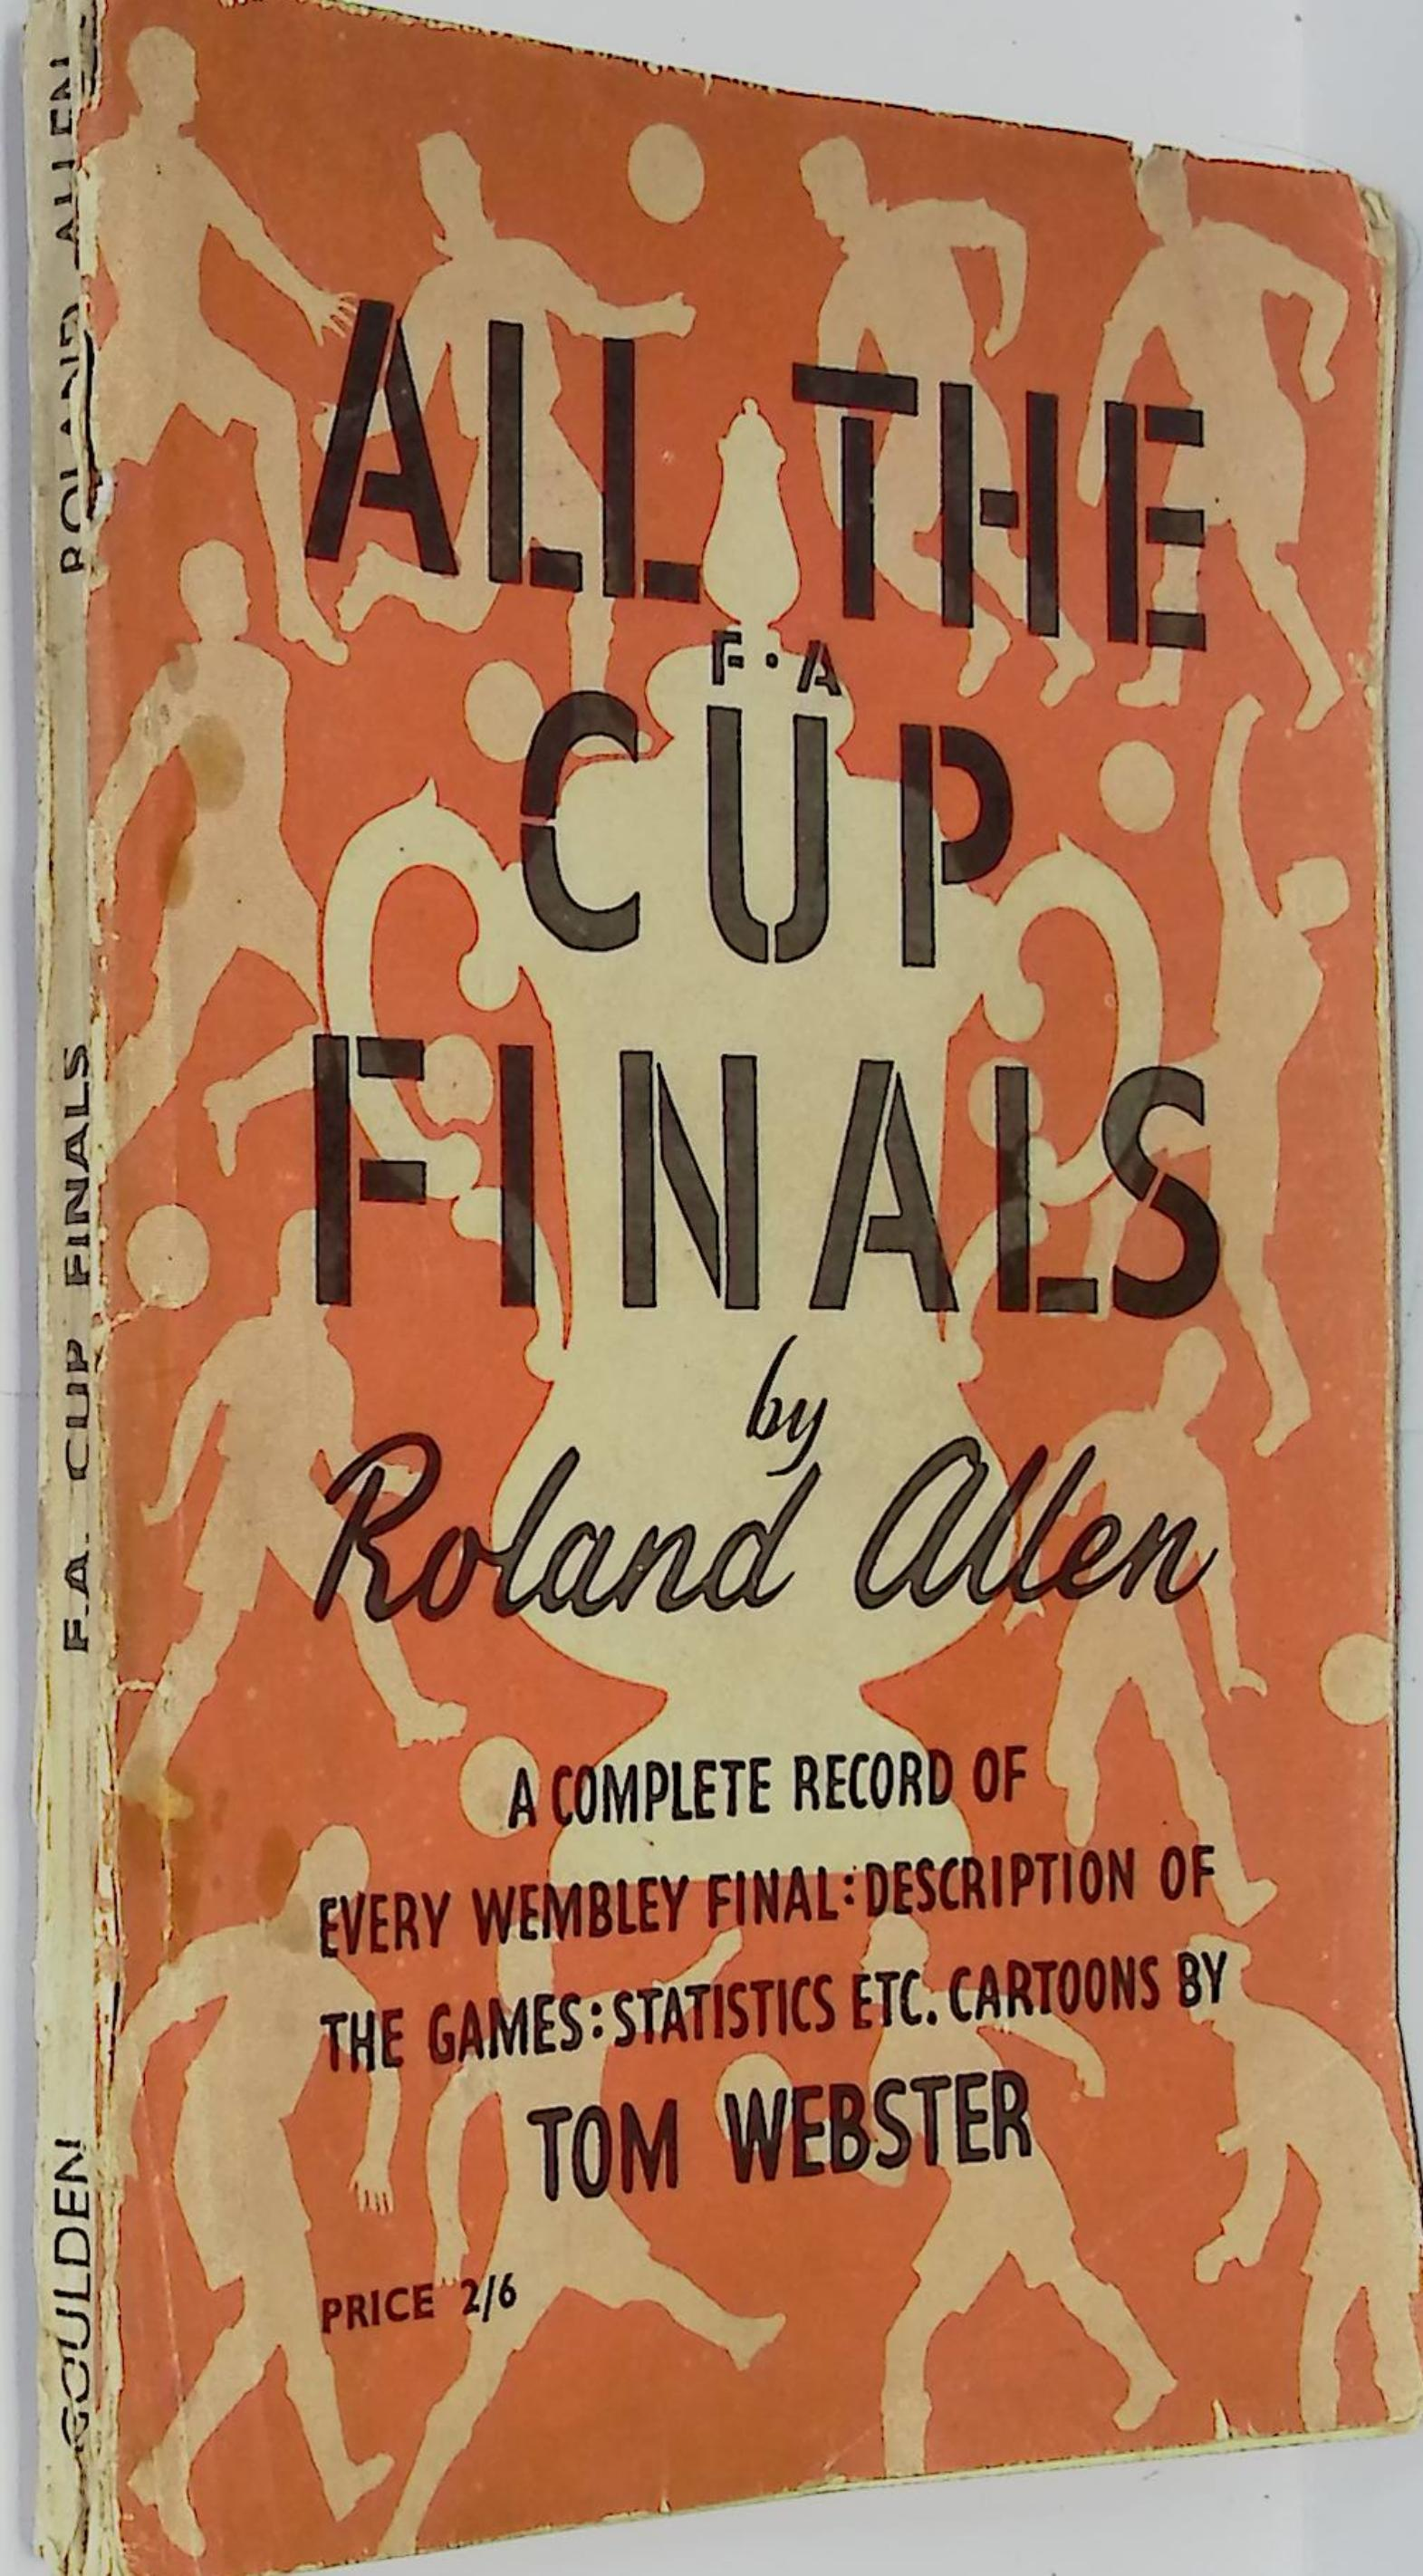 All the F.A. Cup Finals. A Complete Record of Every Wembley Final: Description of the Games: Statistics etc.